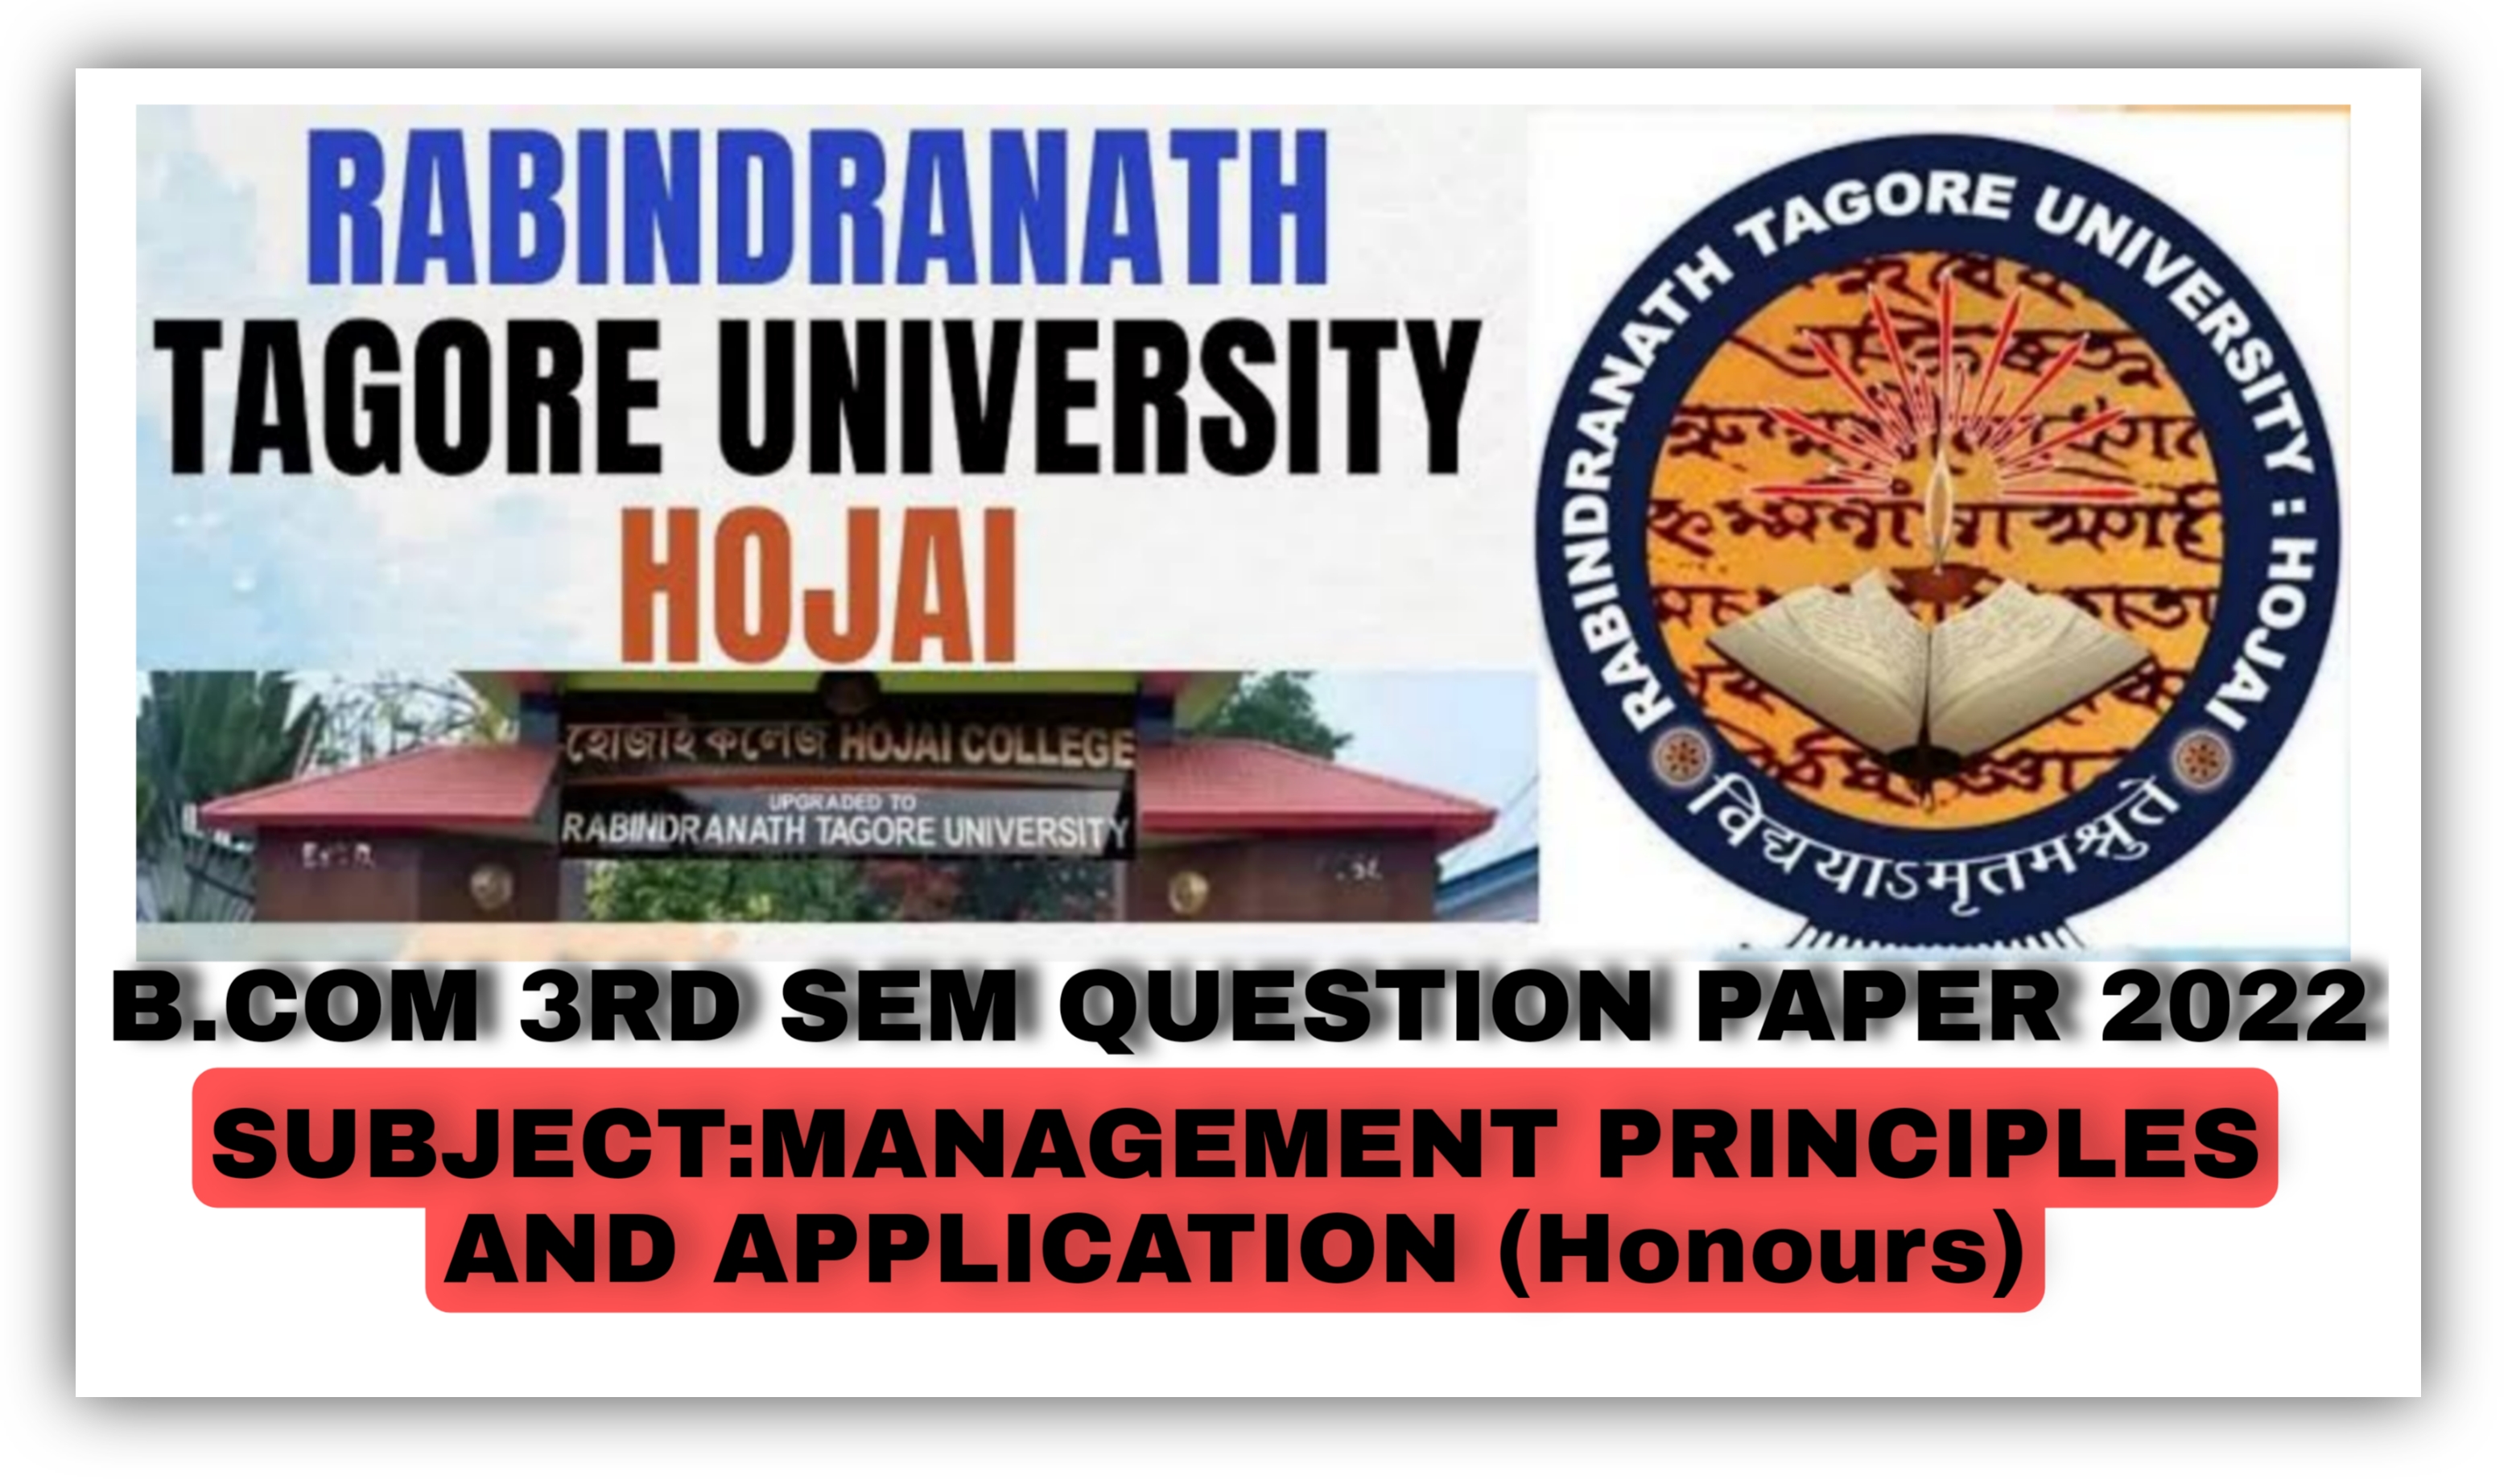 Rabindranath Tagore University question paper, Rabindranath Tagore University, RTU QUESTION PAPER 2022, MANAGEMENT PRINCIPLE AND APPLICATION QUESTION PAPER 2022, MANAGEMENT PRINCIPLE AND APPLICATION, BCOM 3RD SEMESTER QUESTION PAPER, BCOM 3RD SEMESTER RTU,